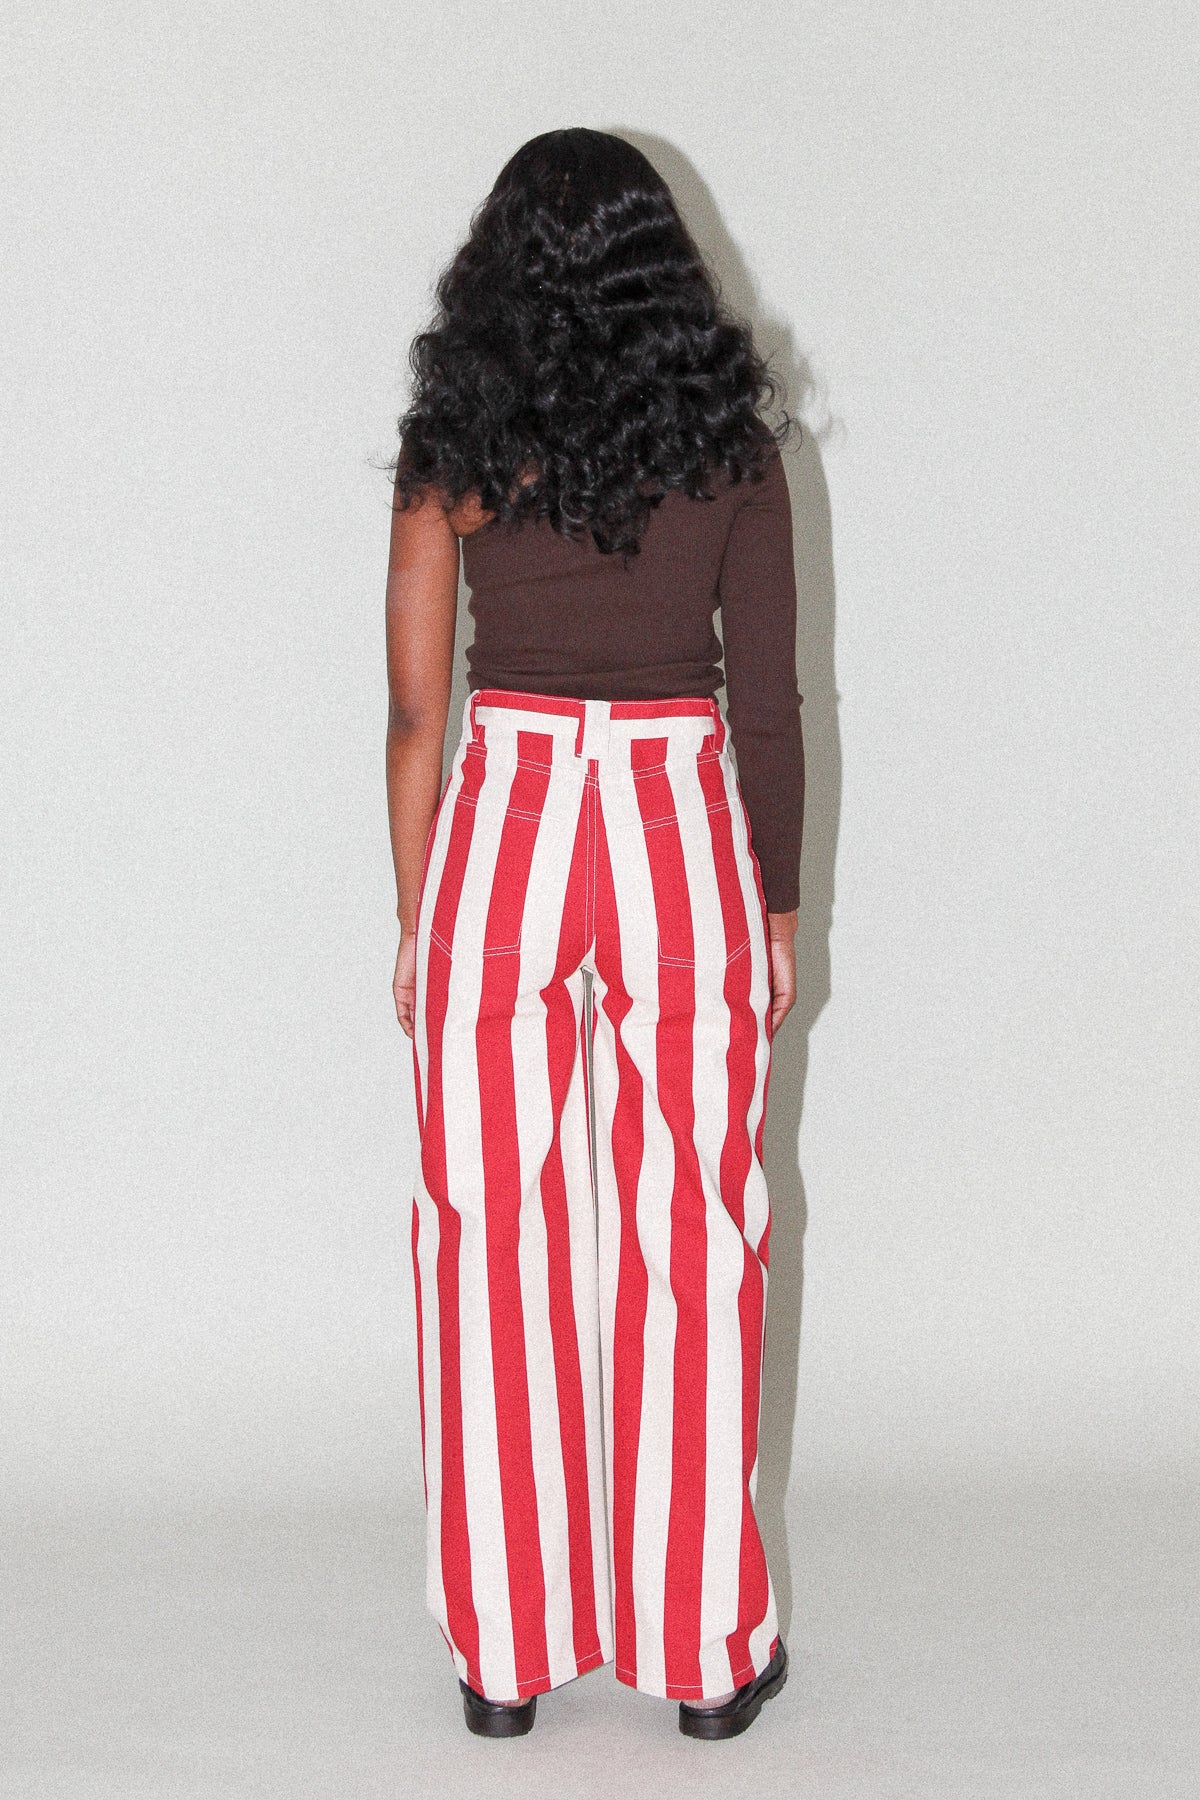 Unelma Meteor Pant in Cherry & Natural Stripe